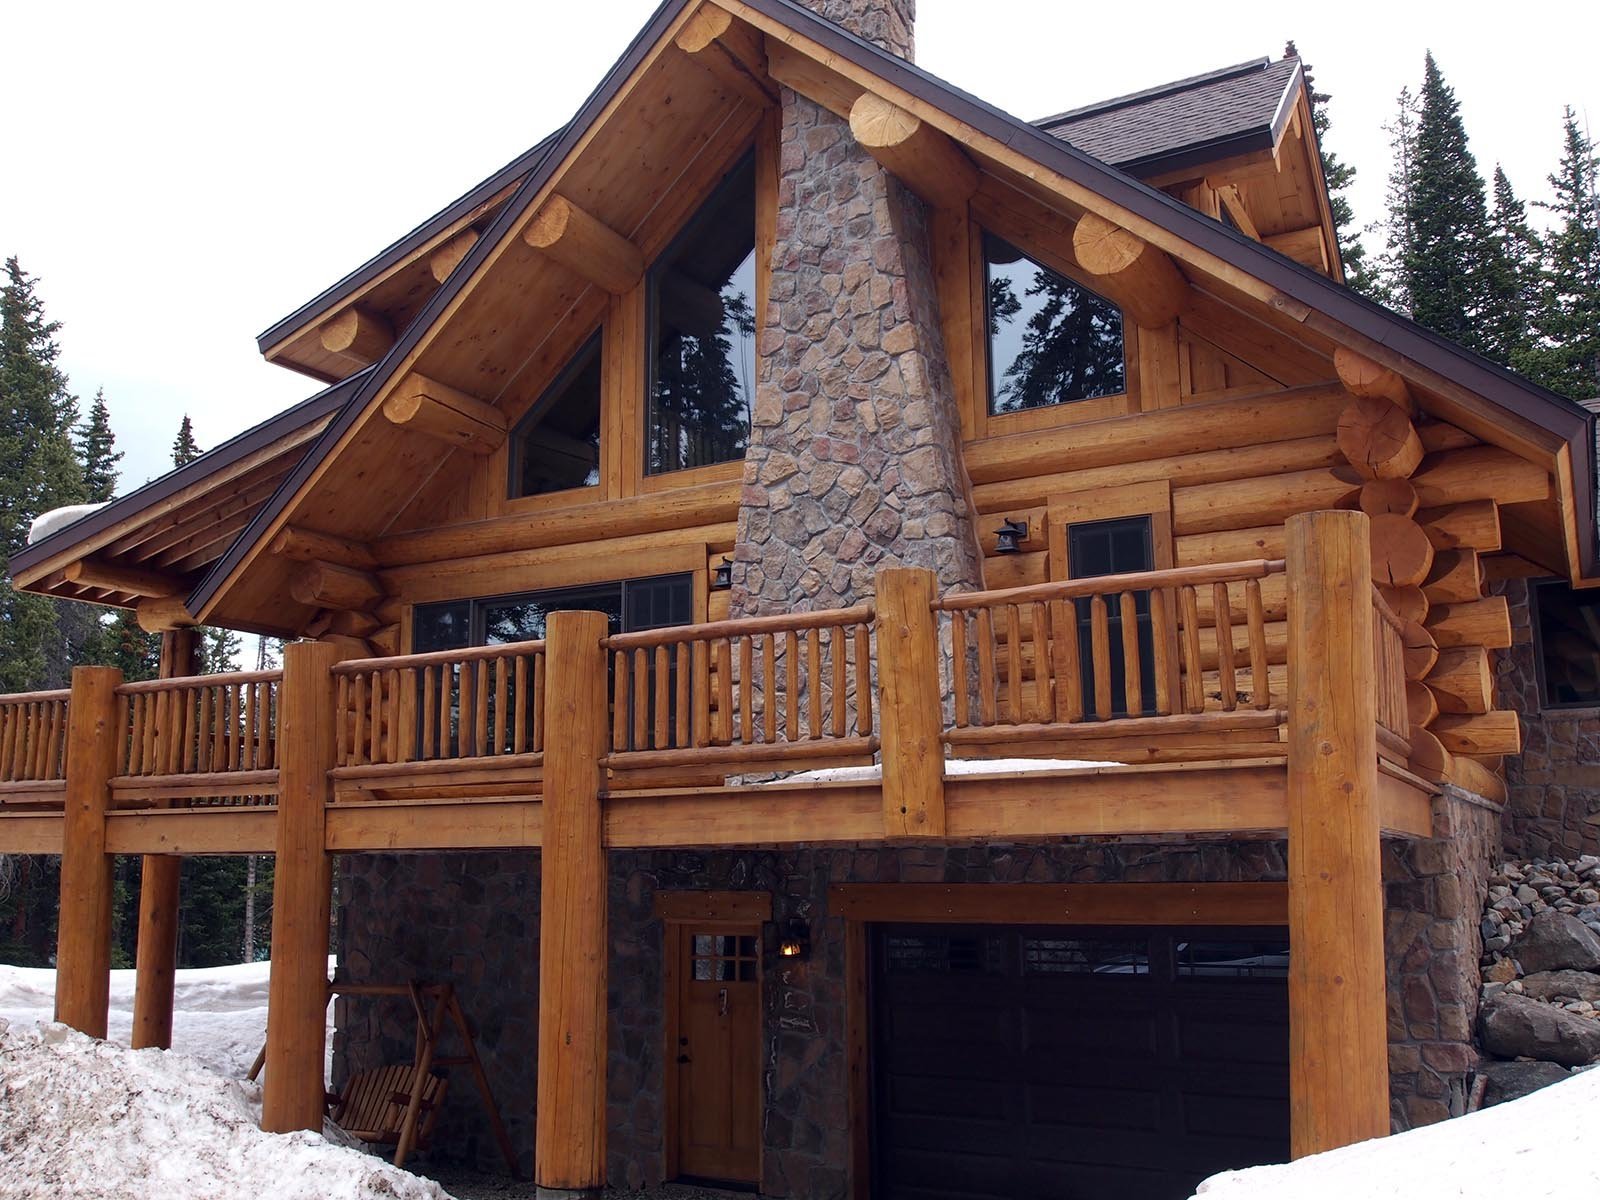 typical Quandary Mountain Village or Northstar Village home